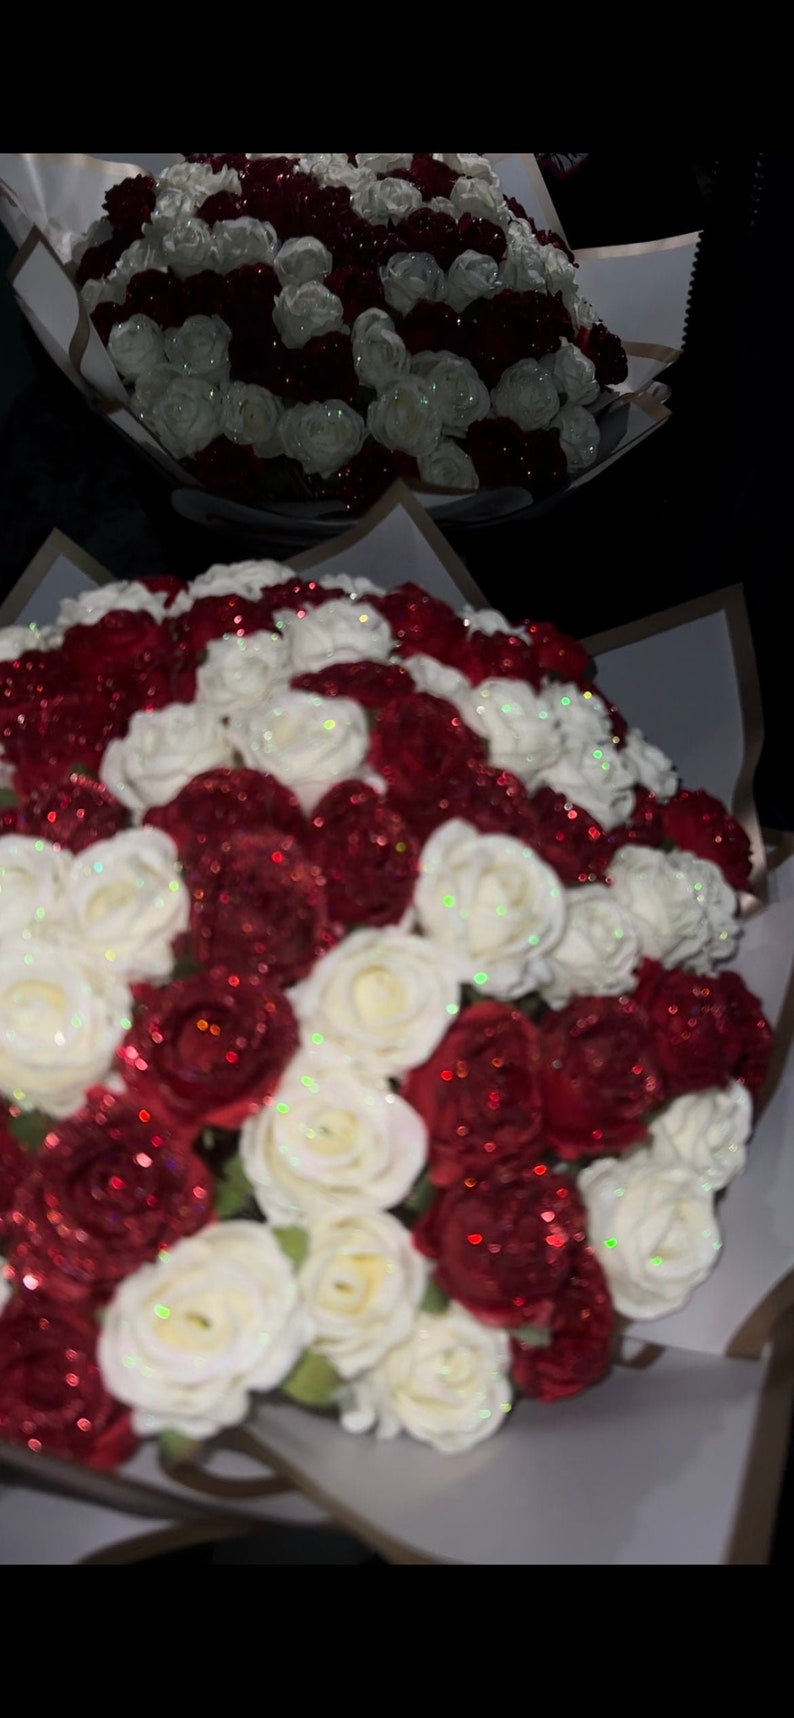 PREORDER Glitter Rose Bouquet Glitter Roses 100 Roses 50 Roses bouquet Valentine's Day image 4